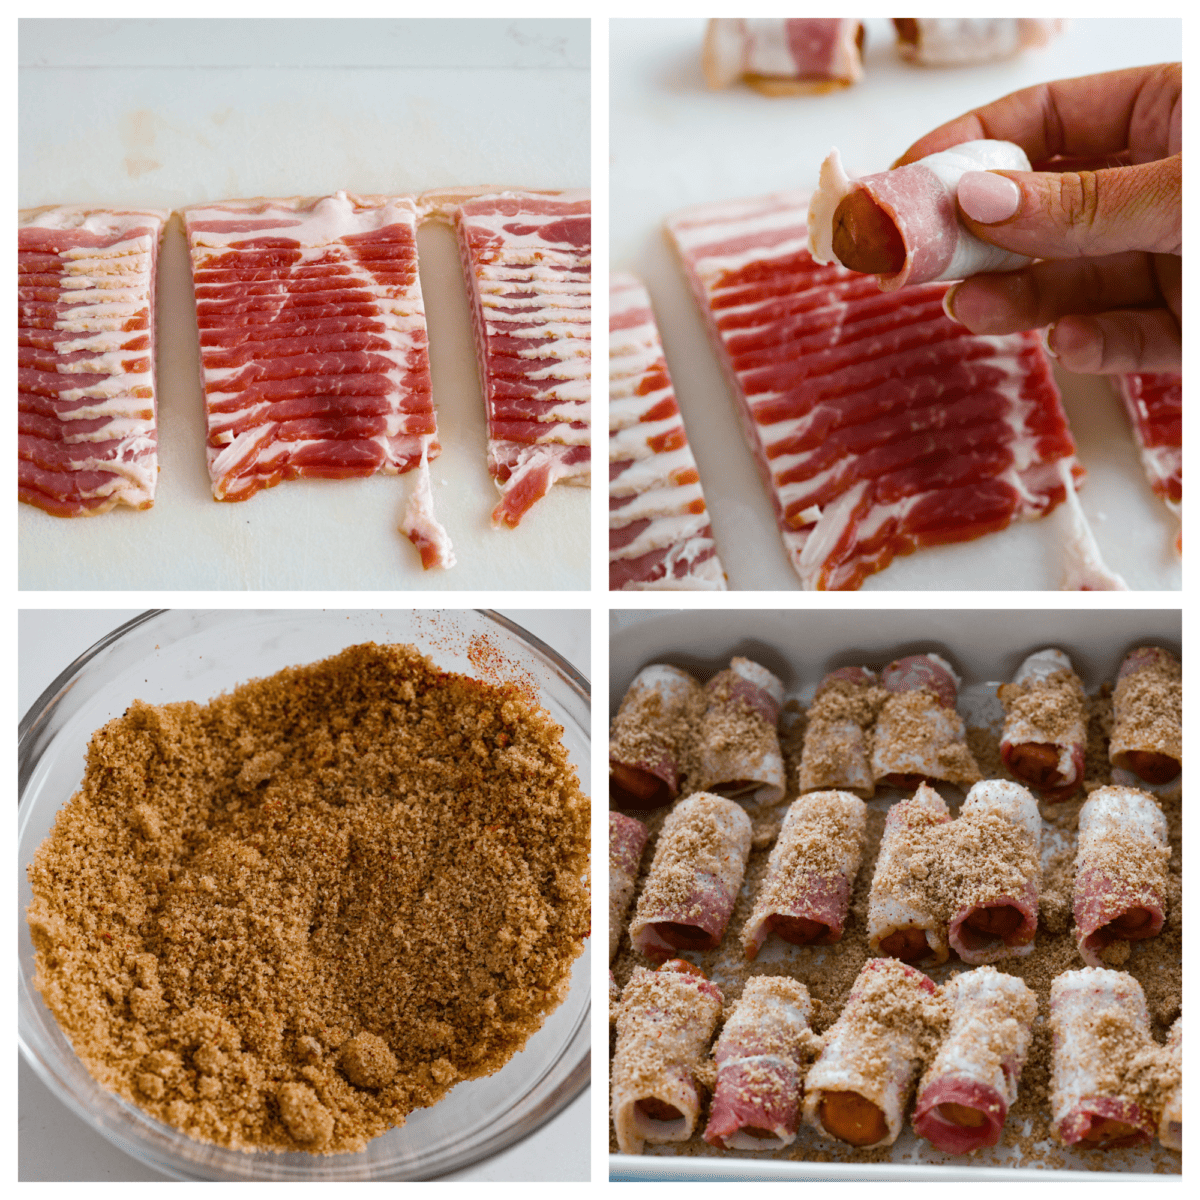 First photo of bacon cut in thirds. Second photo of bacon wrapping around a sausage. Third photo of sugar and spices mixed.  Fourth photo of the sugar mixture sprinkled on top of the bacon wrapped smokies. 